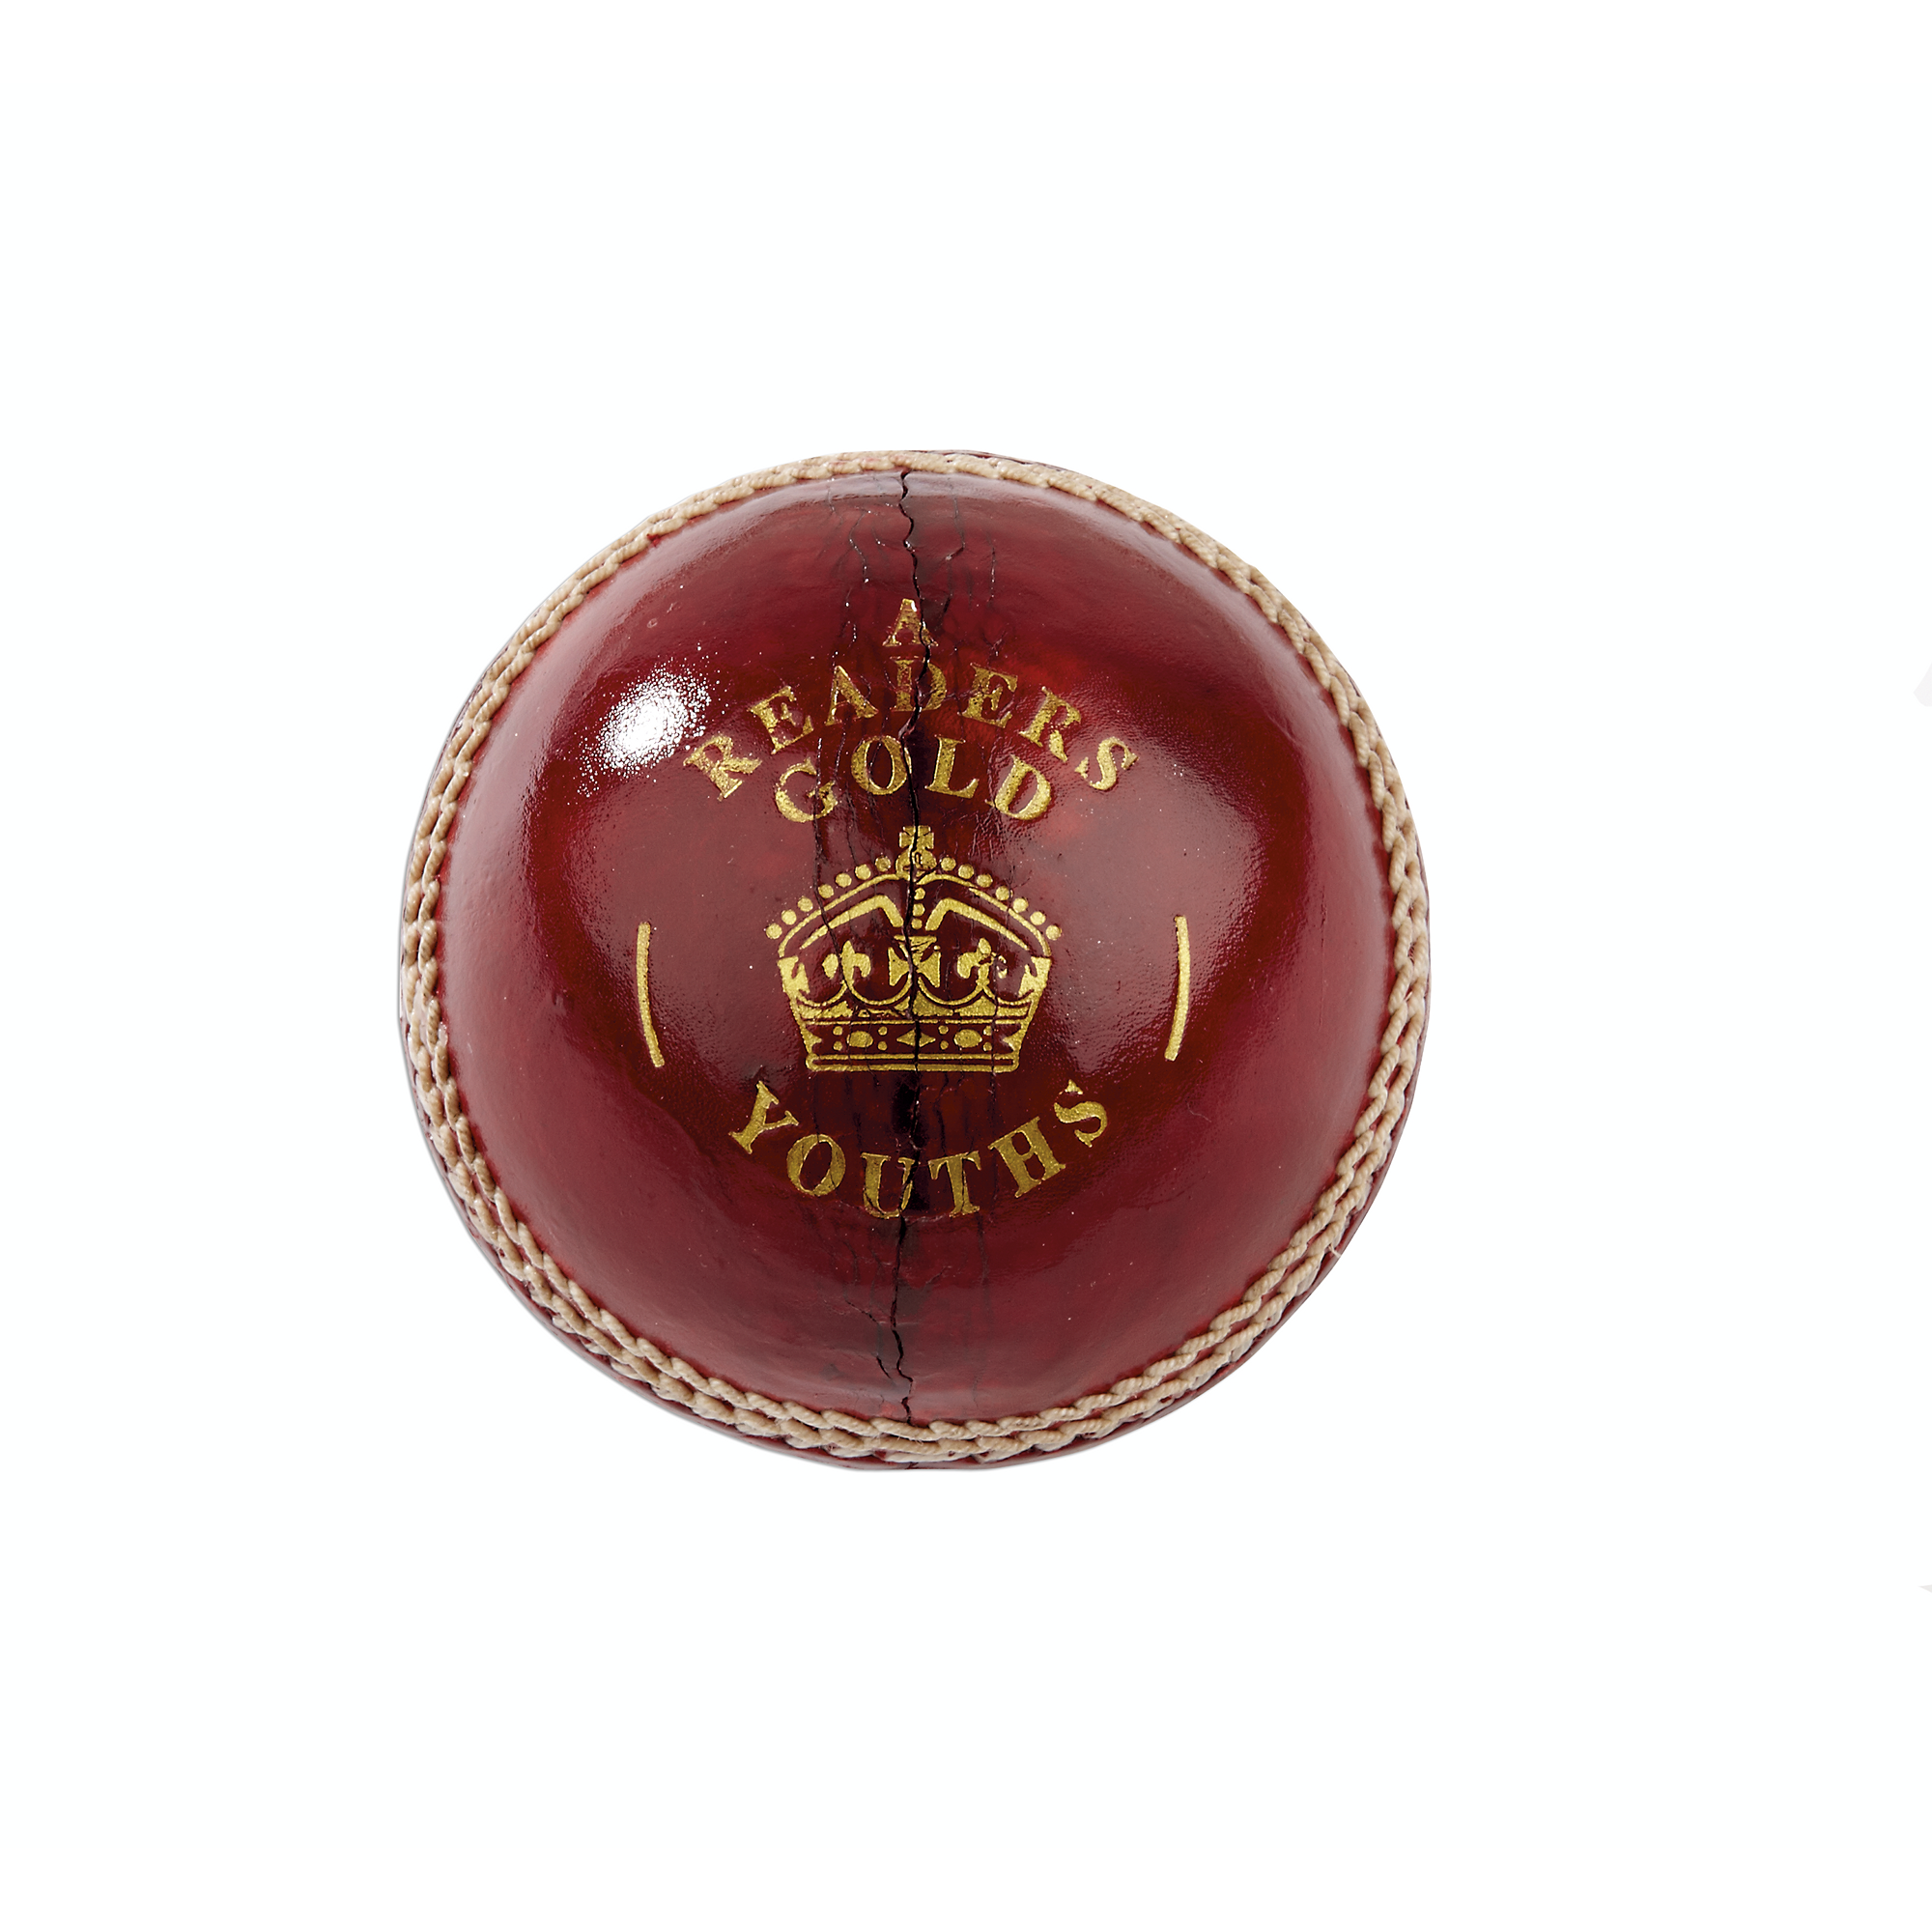 Readers Special School Leather Cricket Ball Youths 4.75oz 